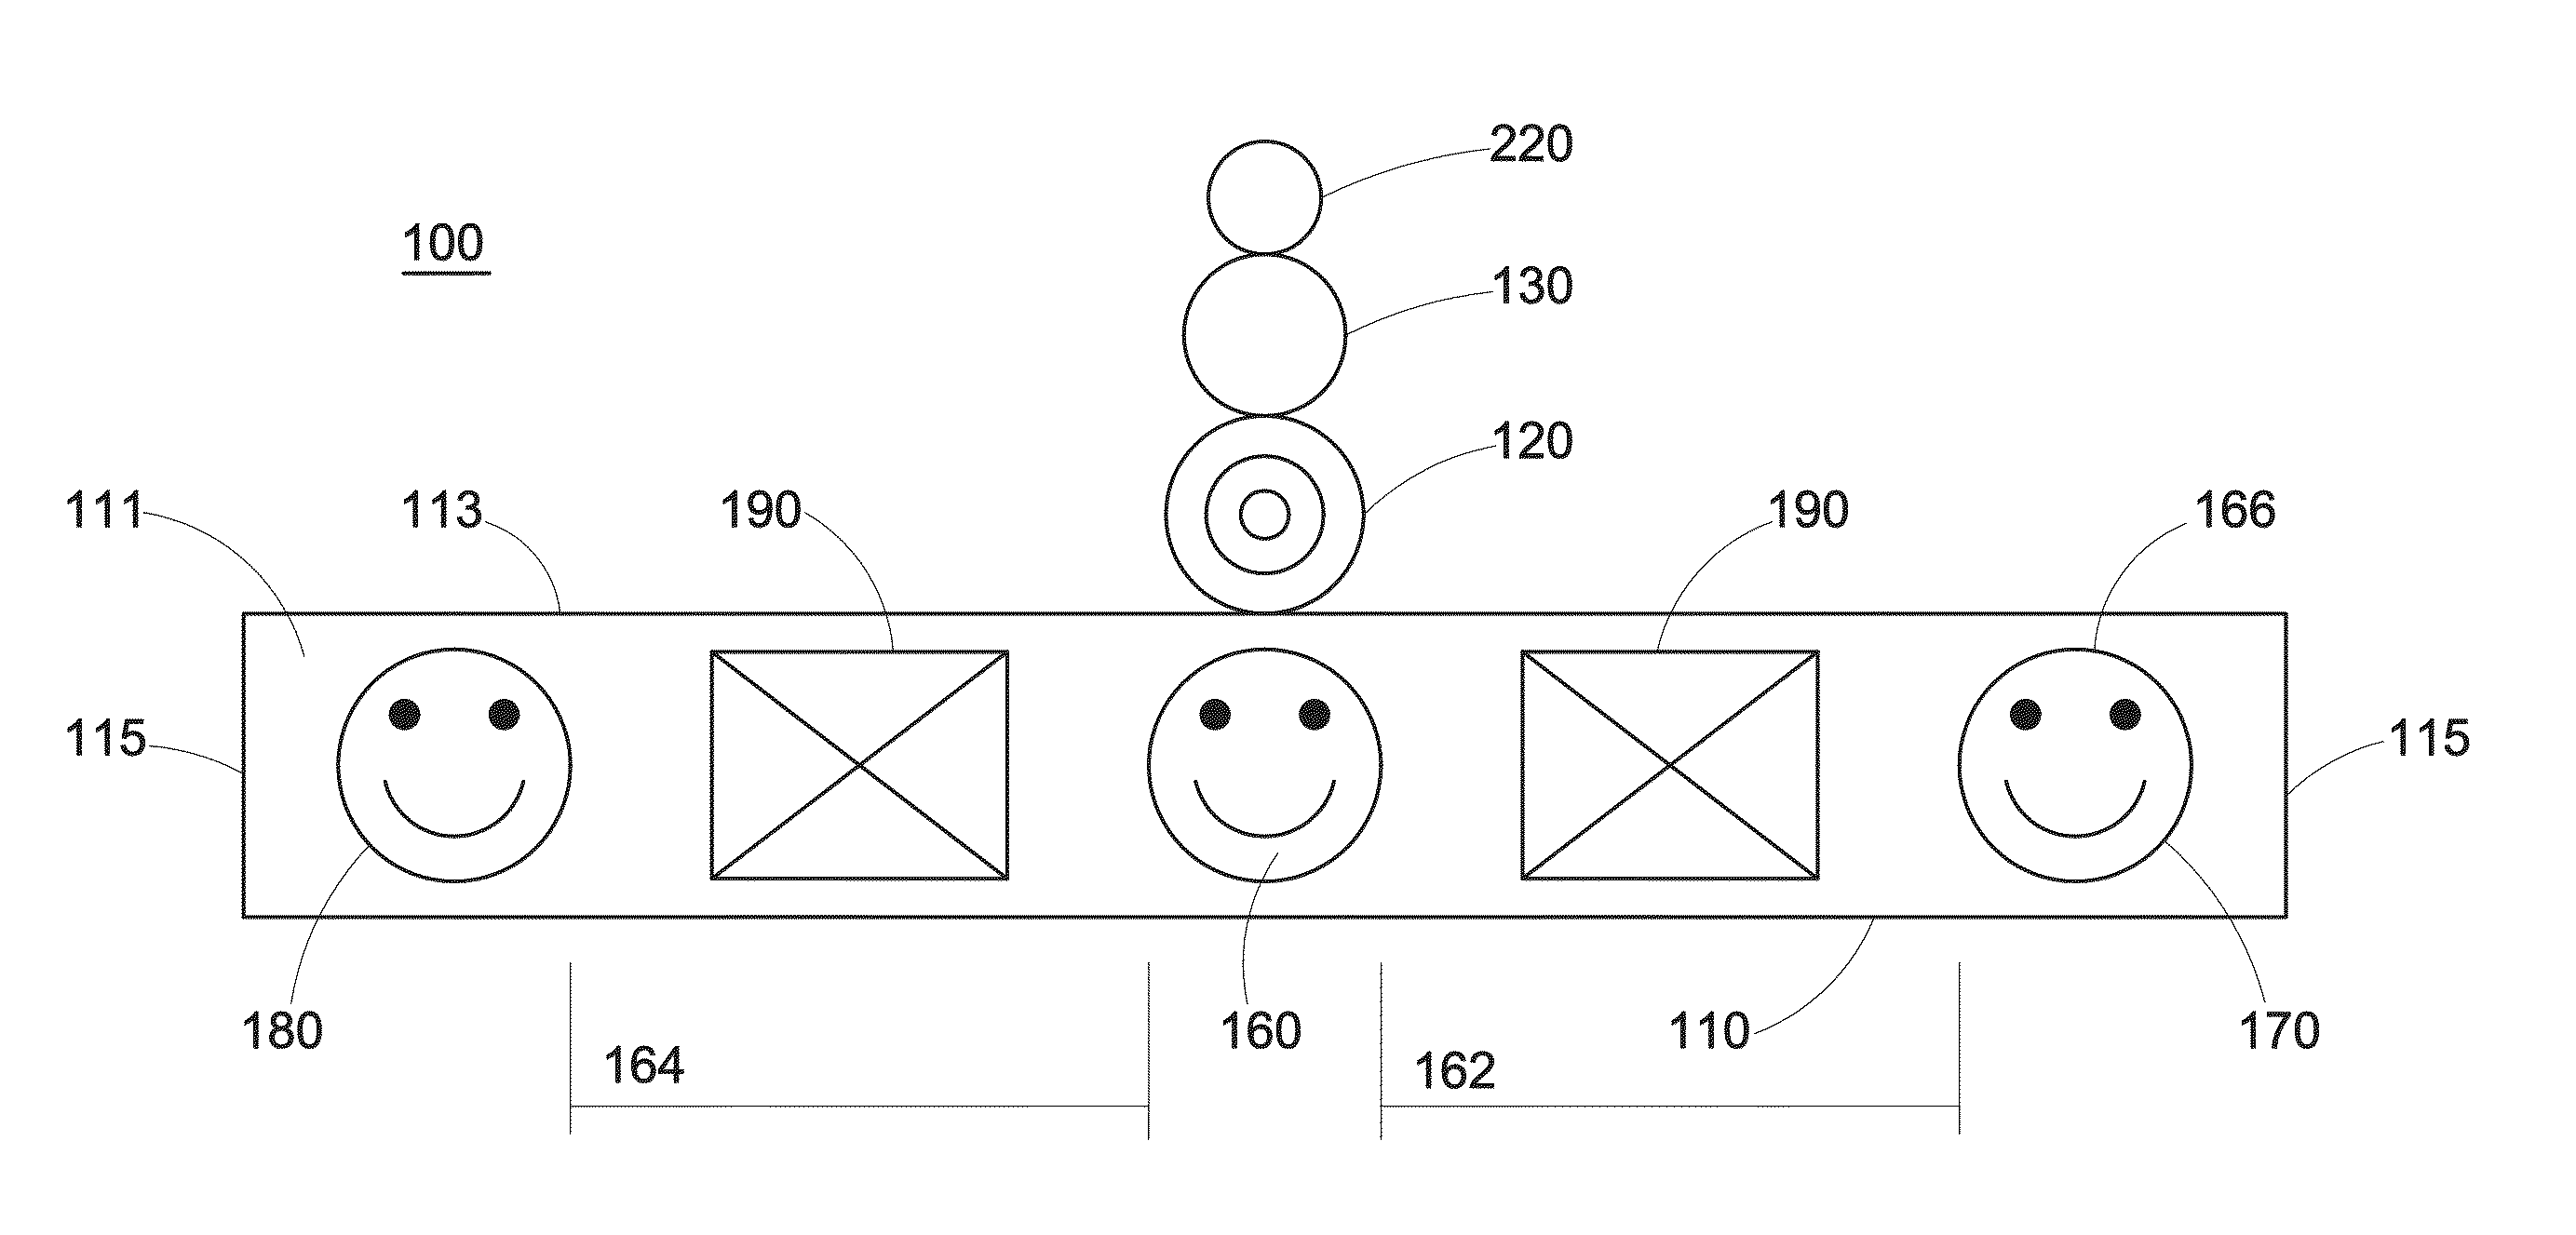 Apparatus and methods for diagnosis of strabismus